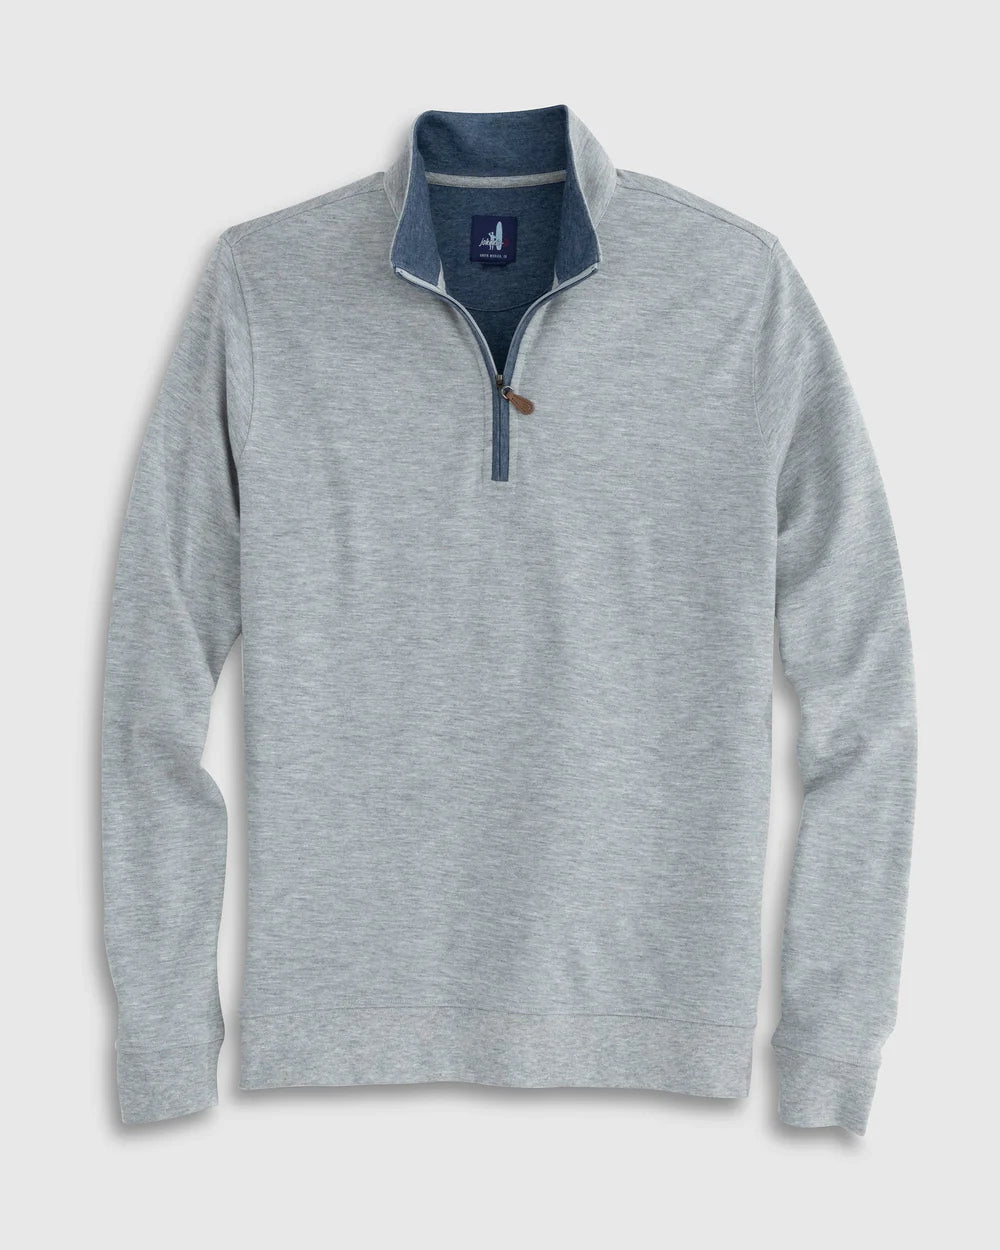 Sully 1/4 Zip Pullover